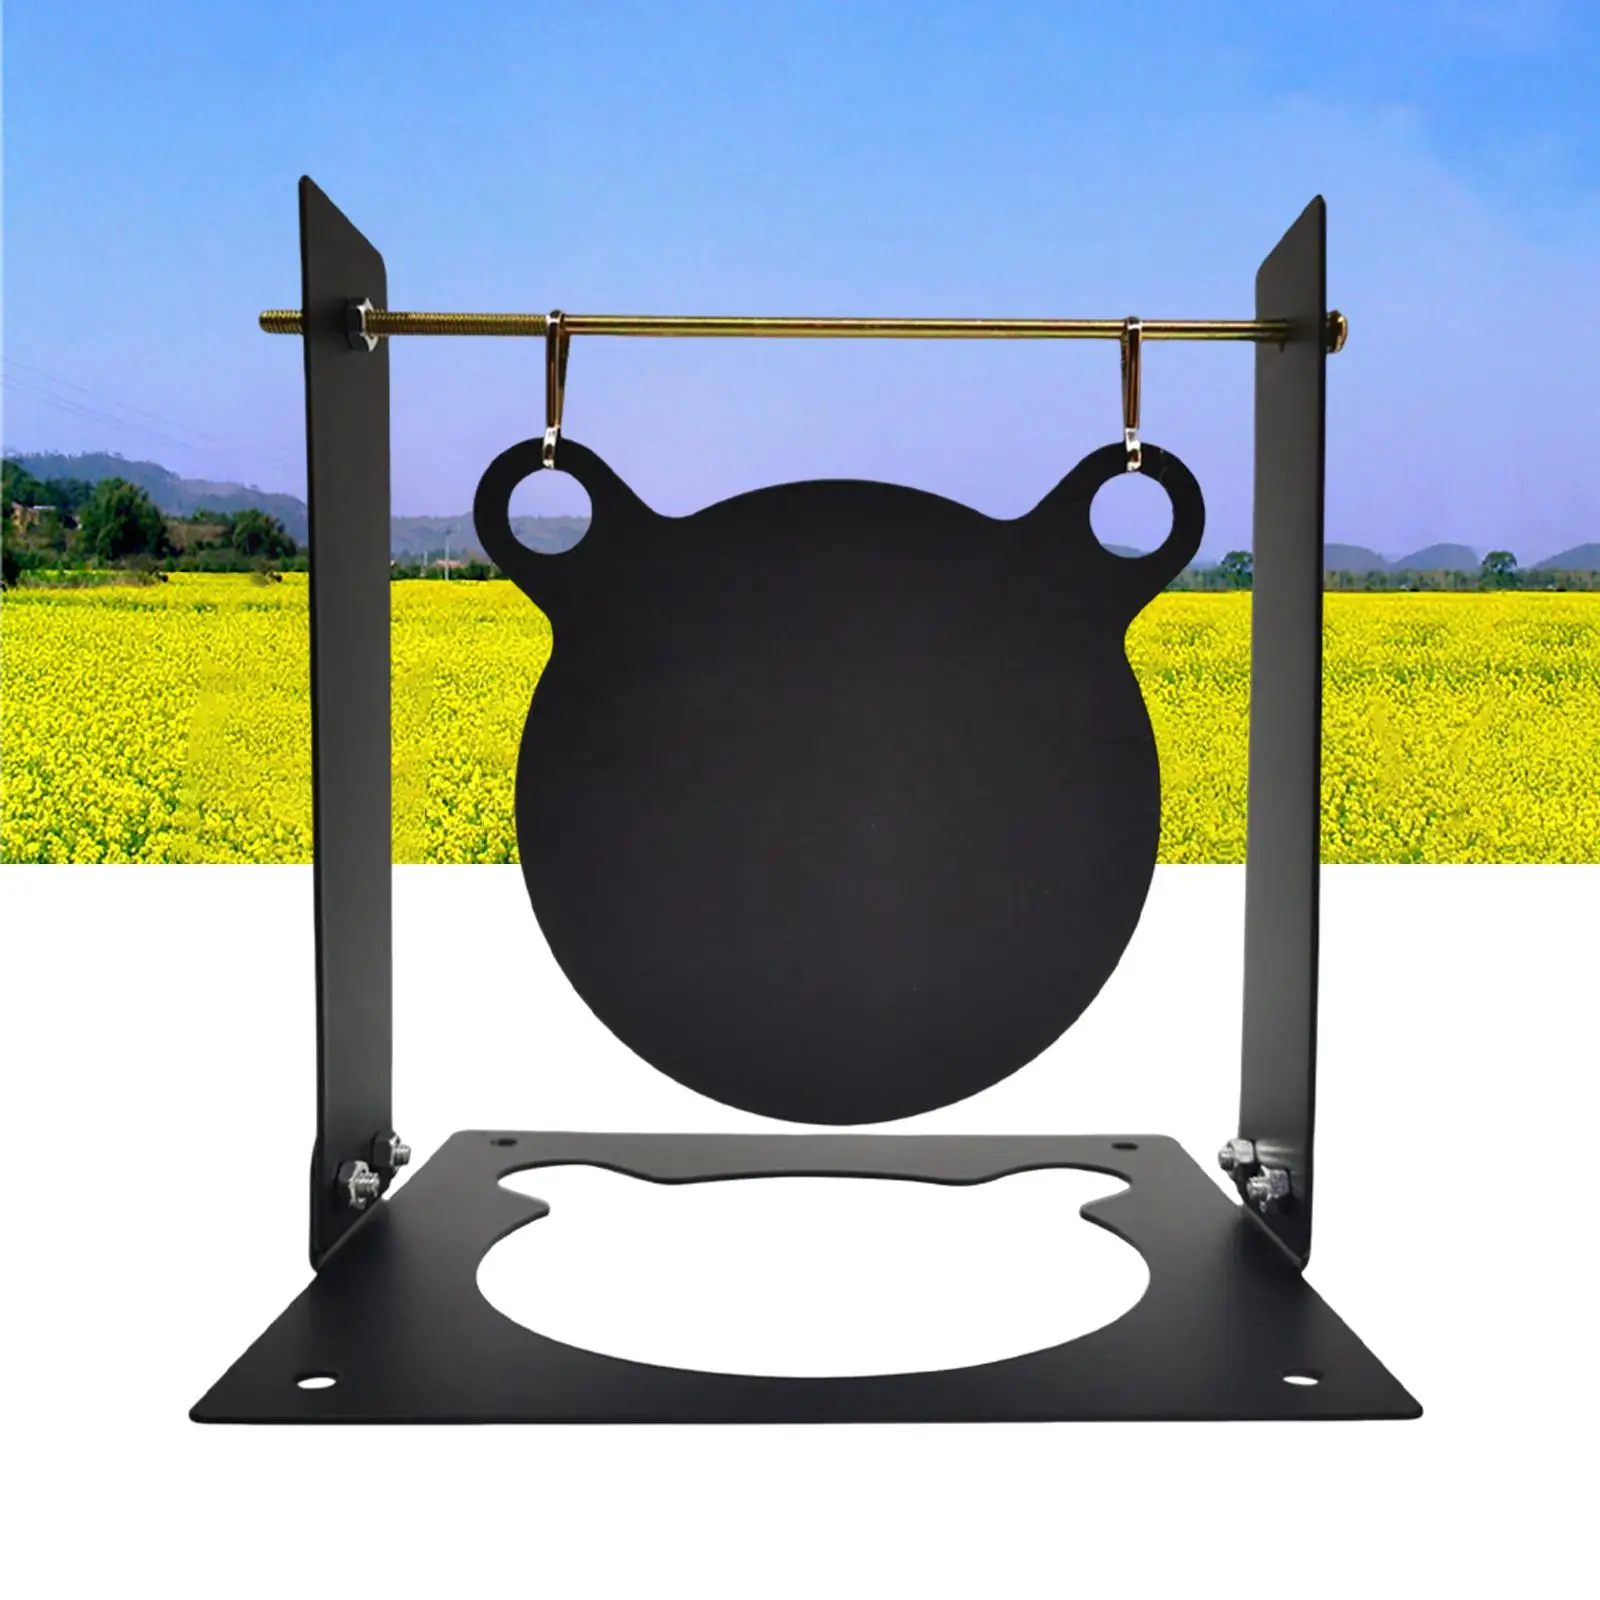 Portable Trainer Target Outdoor Sports Toy Target for Adults Teens